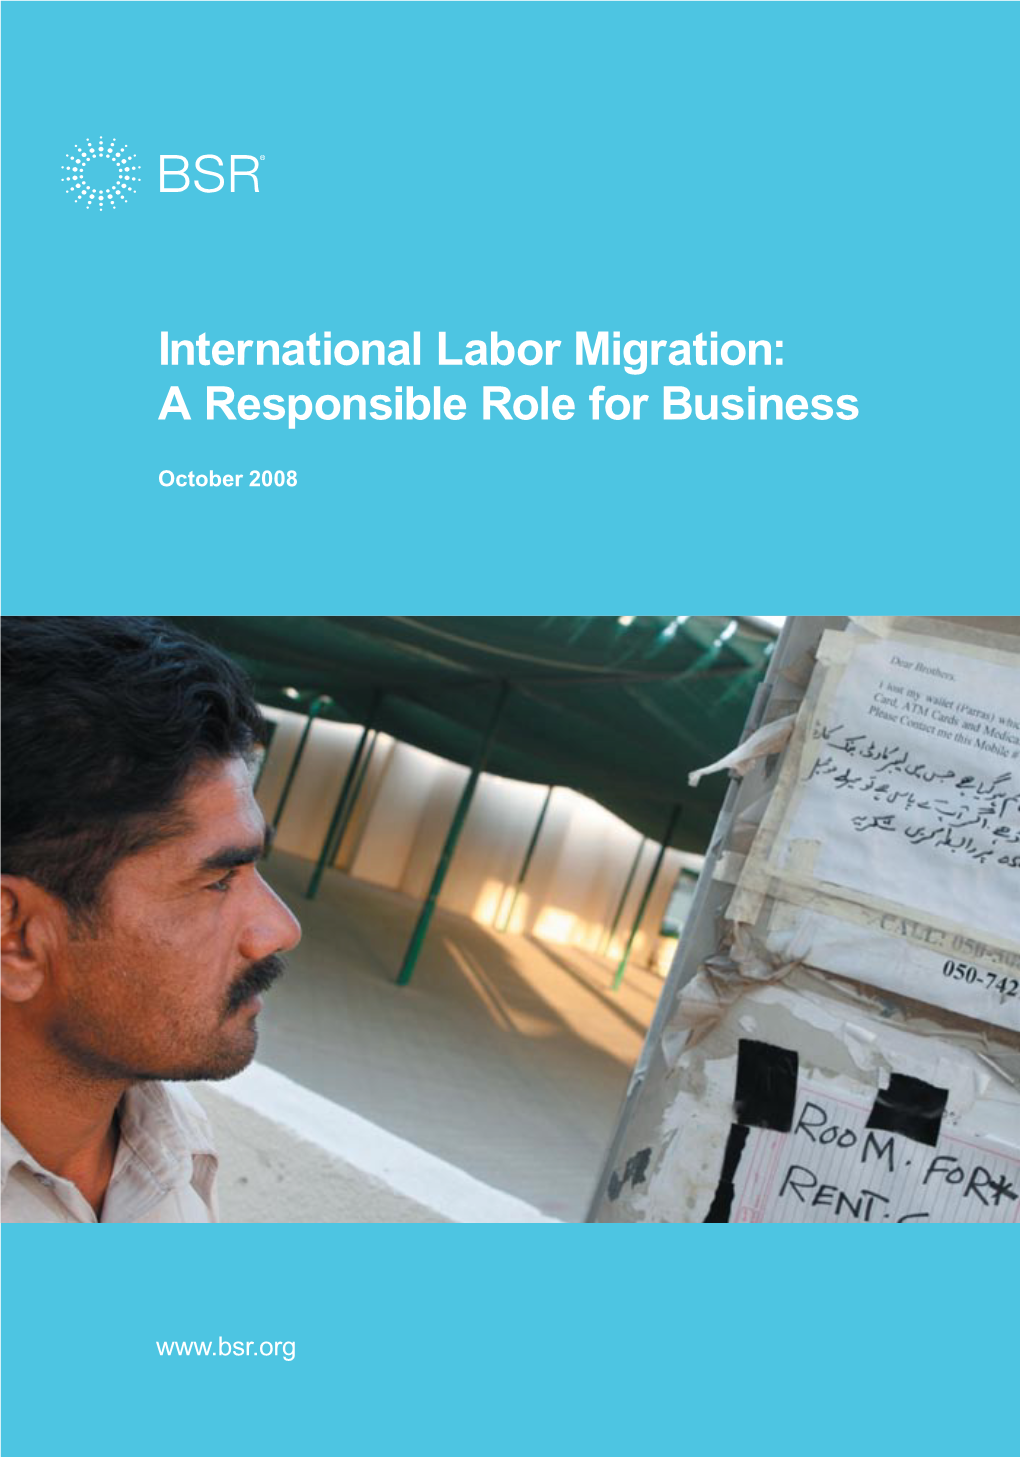 International Labor Migration: a Responsible Role for Business